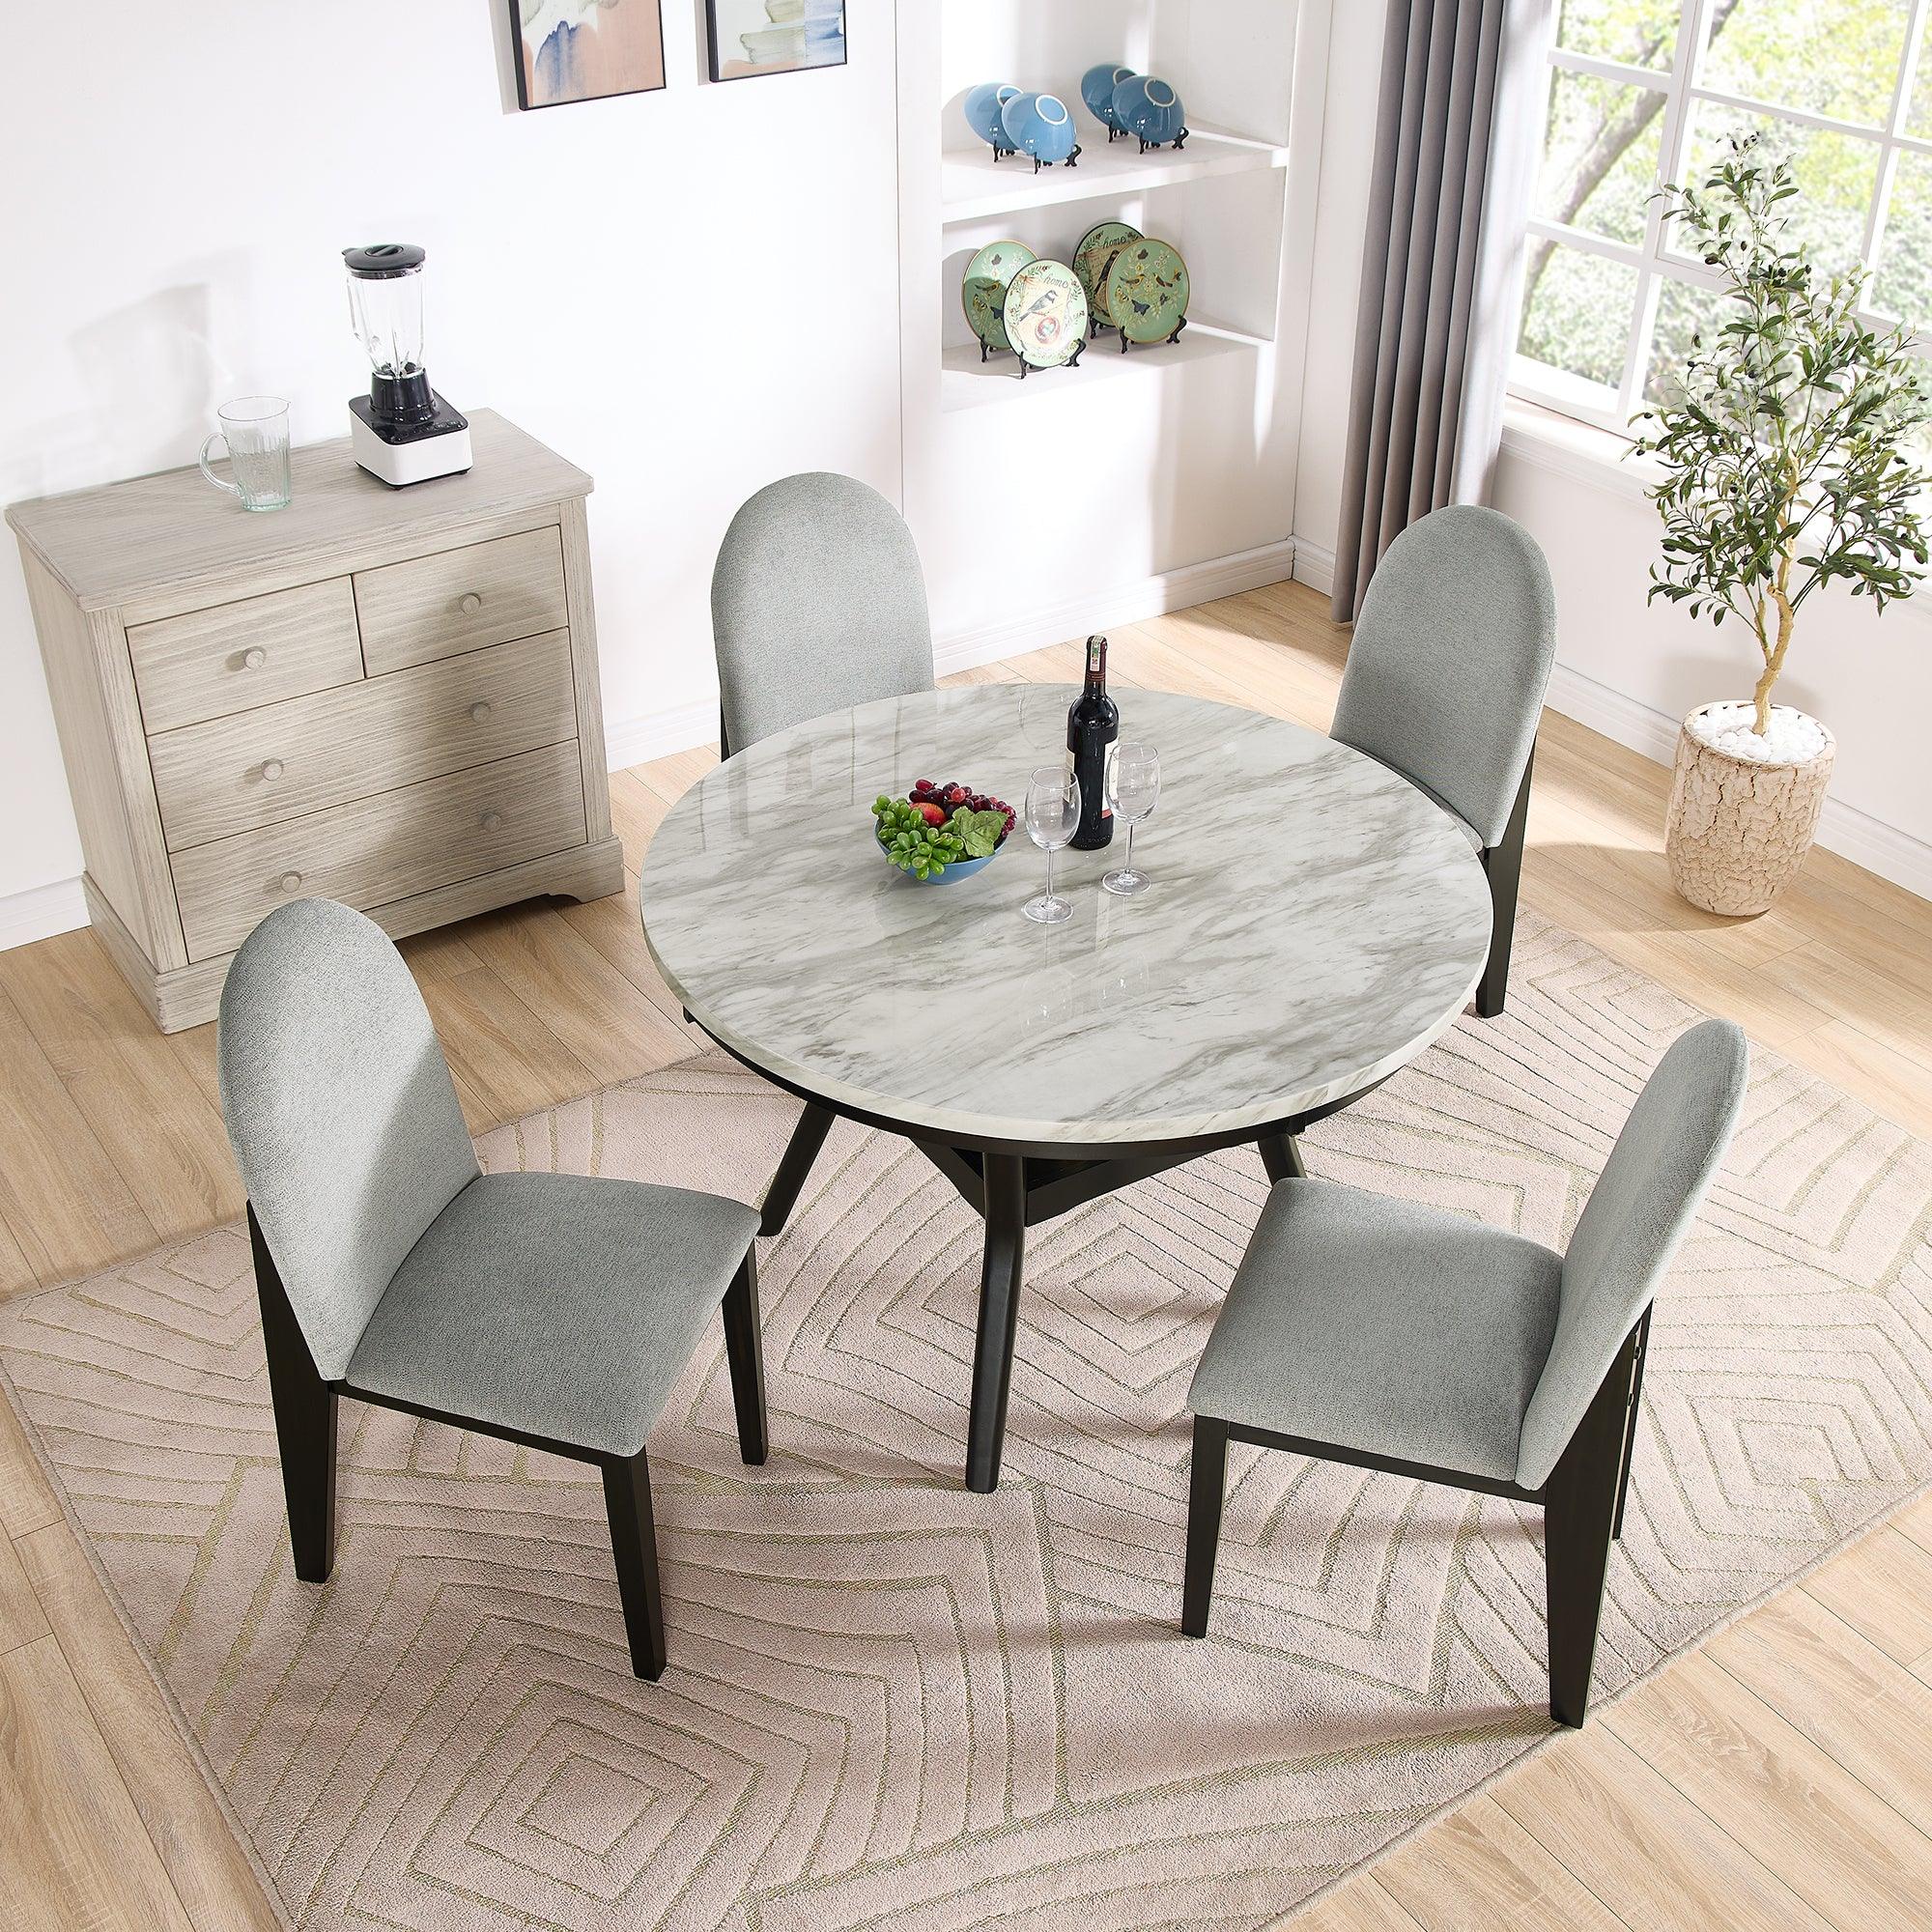 🆓🚛 5 Piece Dining Table & Chair Set, Round Dining Table With 4 Upholstered Chairs